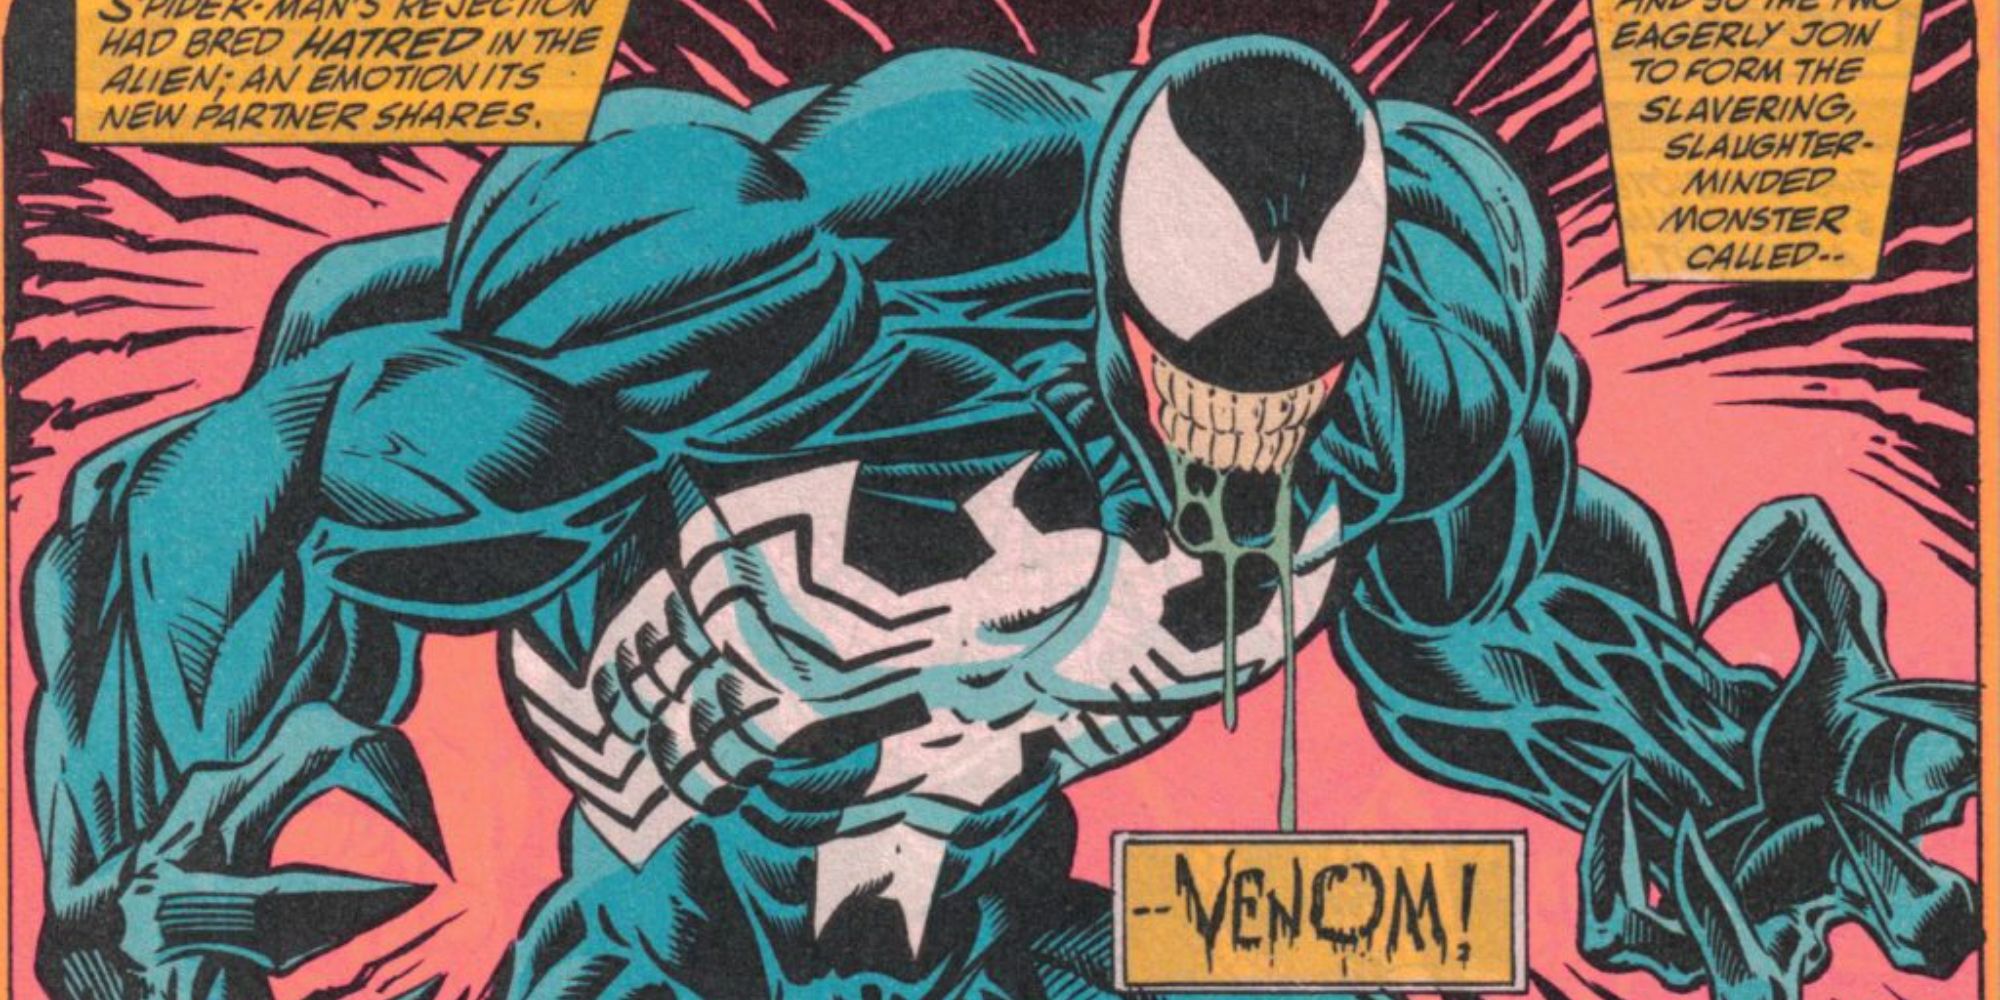 Venom appearing in an early comic